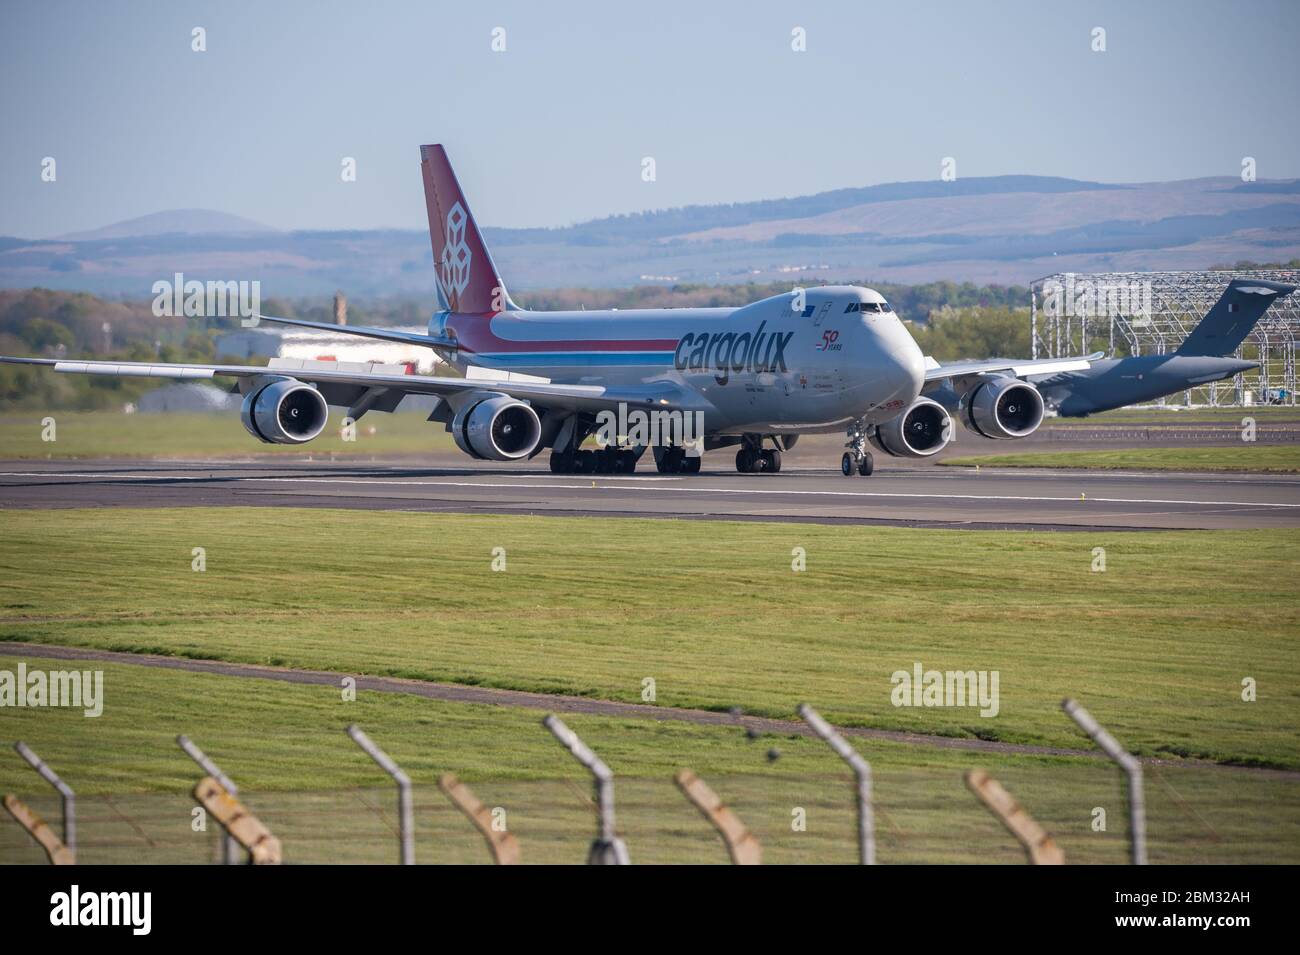 Prestwick, UK. 6th May, 2020. Pictured: A Cargolux Boeing 747-800 Freighter jumbo jet aircraft seen landing at Prestwick International Airport during the extended Coronavirus (COVID-19) Lockdown. Credit: Colin Fisher/Alamy Live News Stock Photo